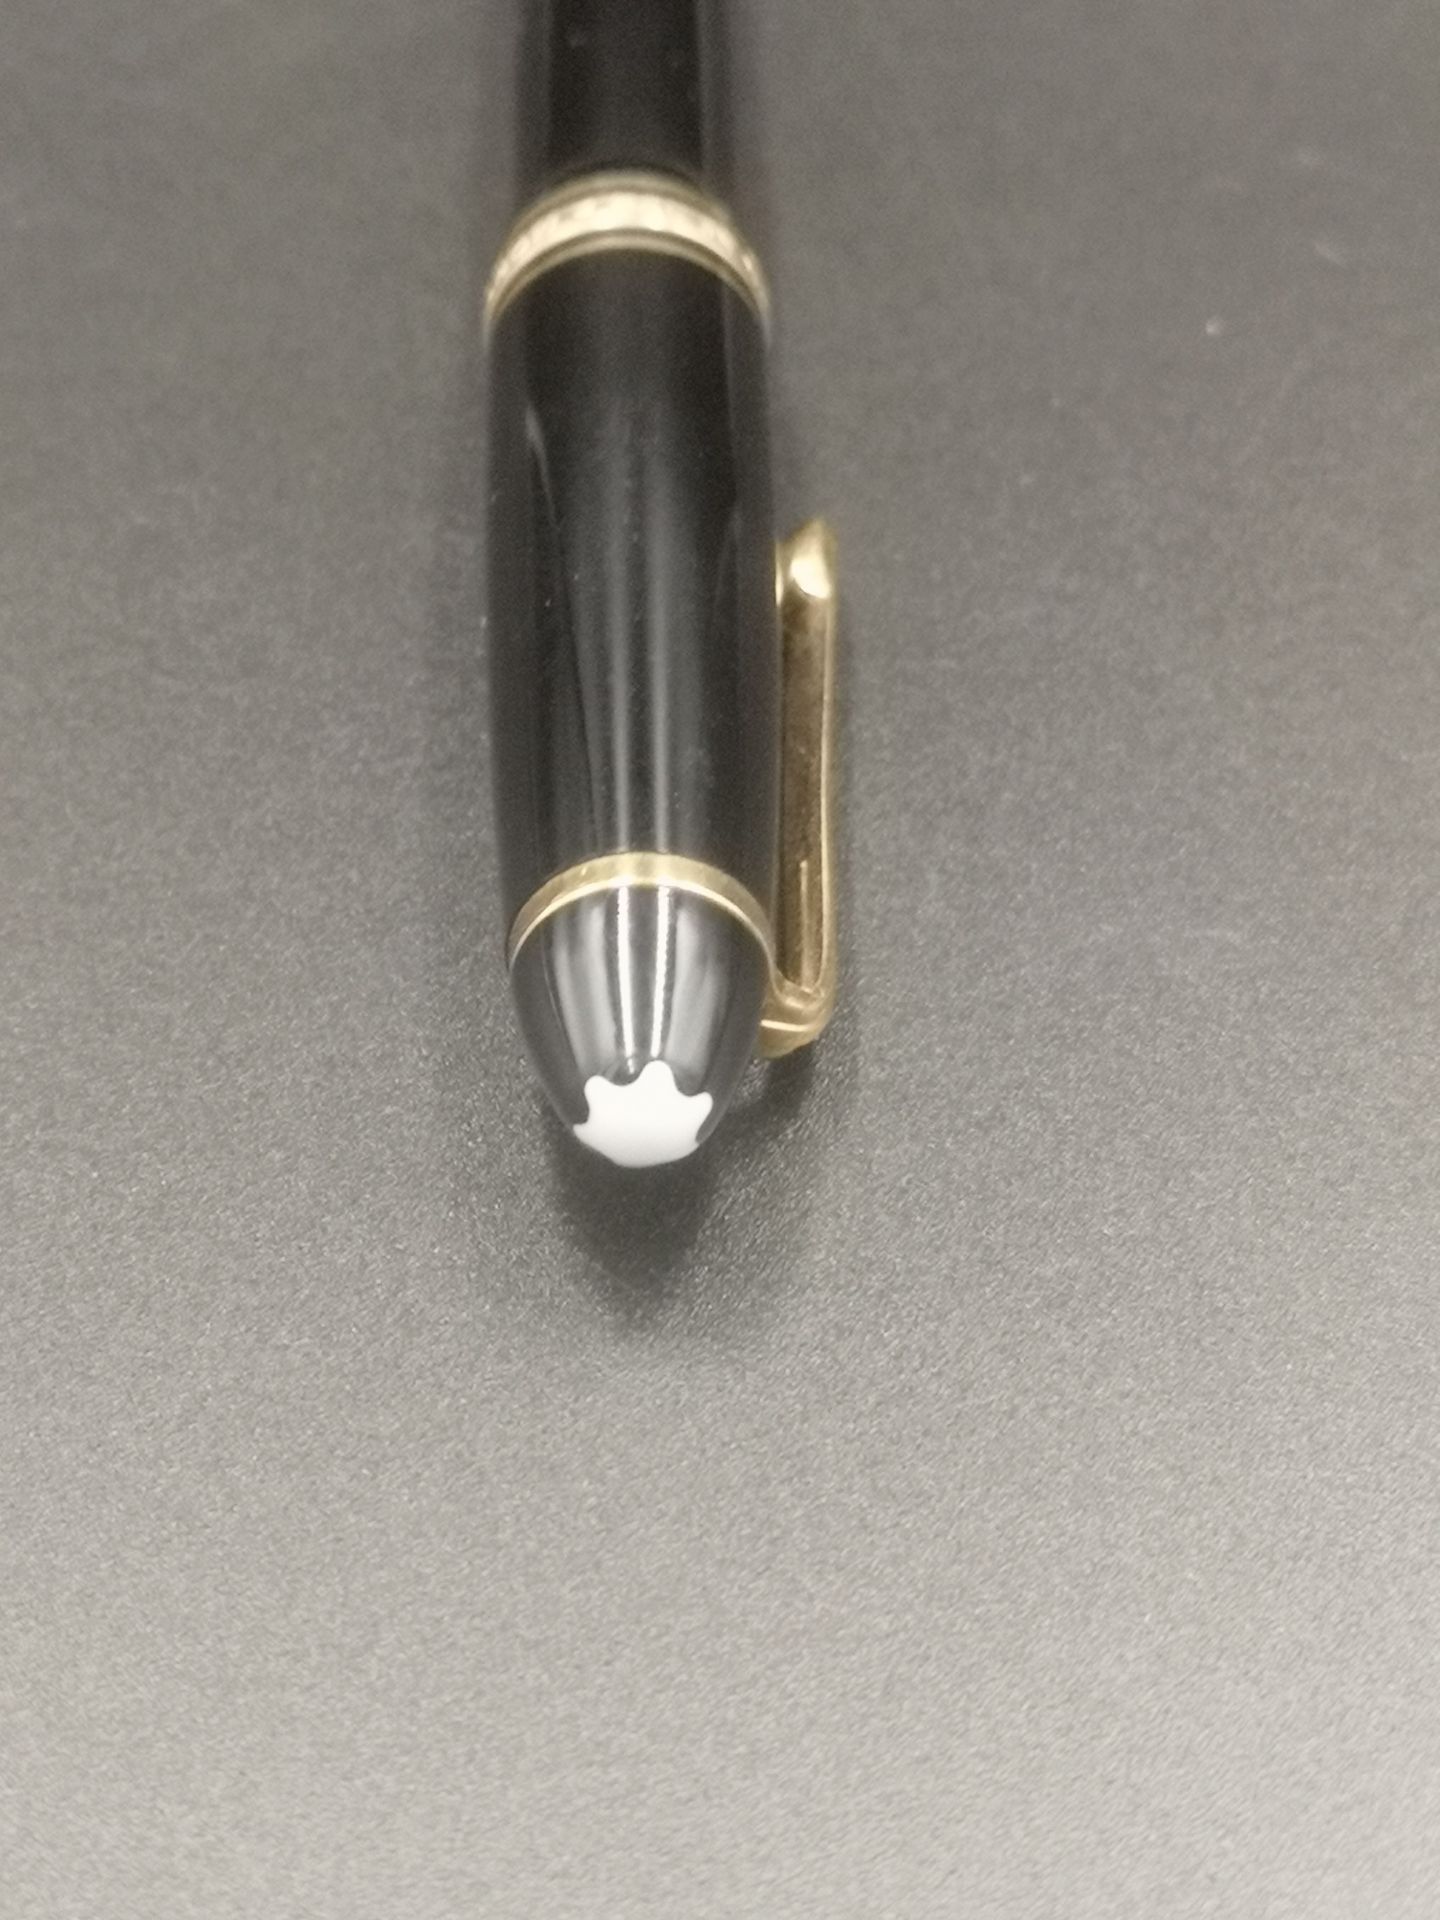 Montblanc Meisterstuck fountain pen - Image 3 of 6